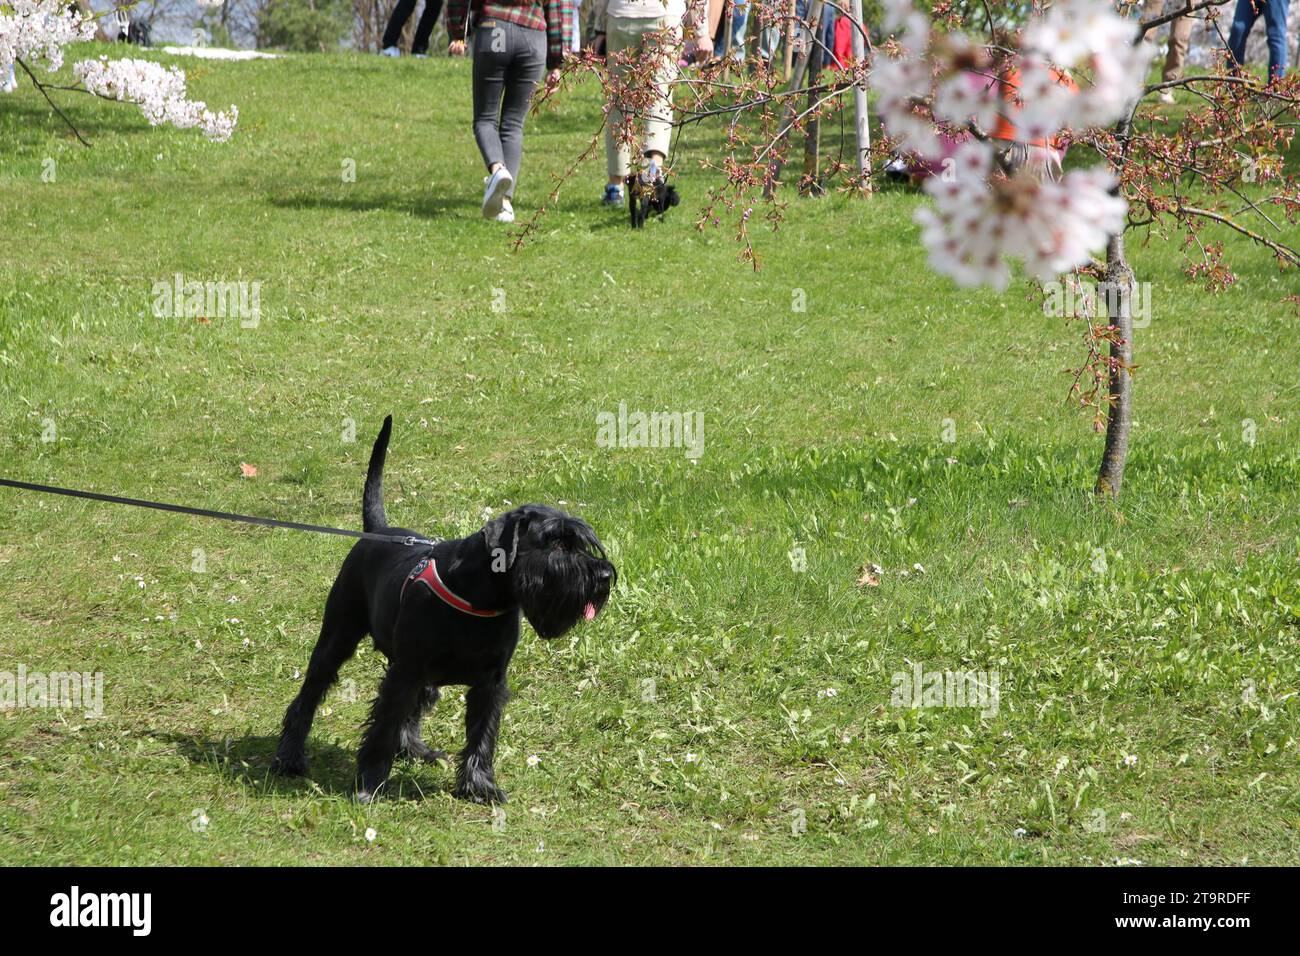 dog, pet, cherry tree, person, photography, walking, public park, outdoor, nature, adult, lifestyle, togetherness, active lifestyle, friends, weekend Stock Photo